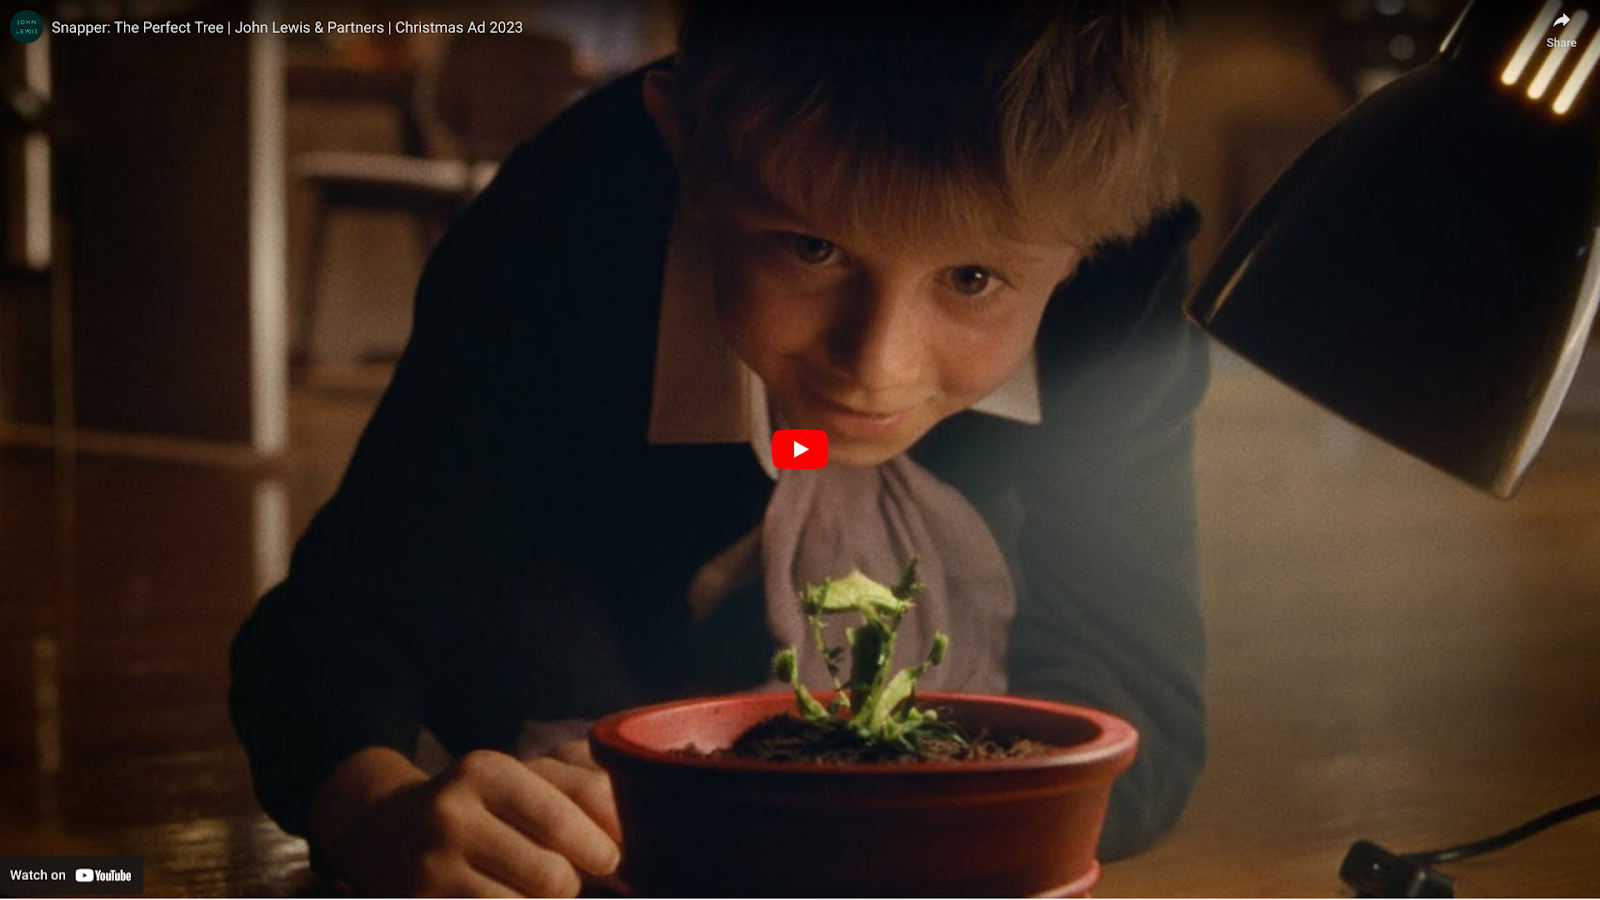 A child looking at a plantDescription automatically generated